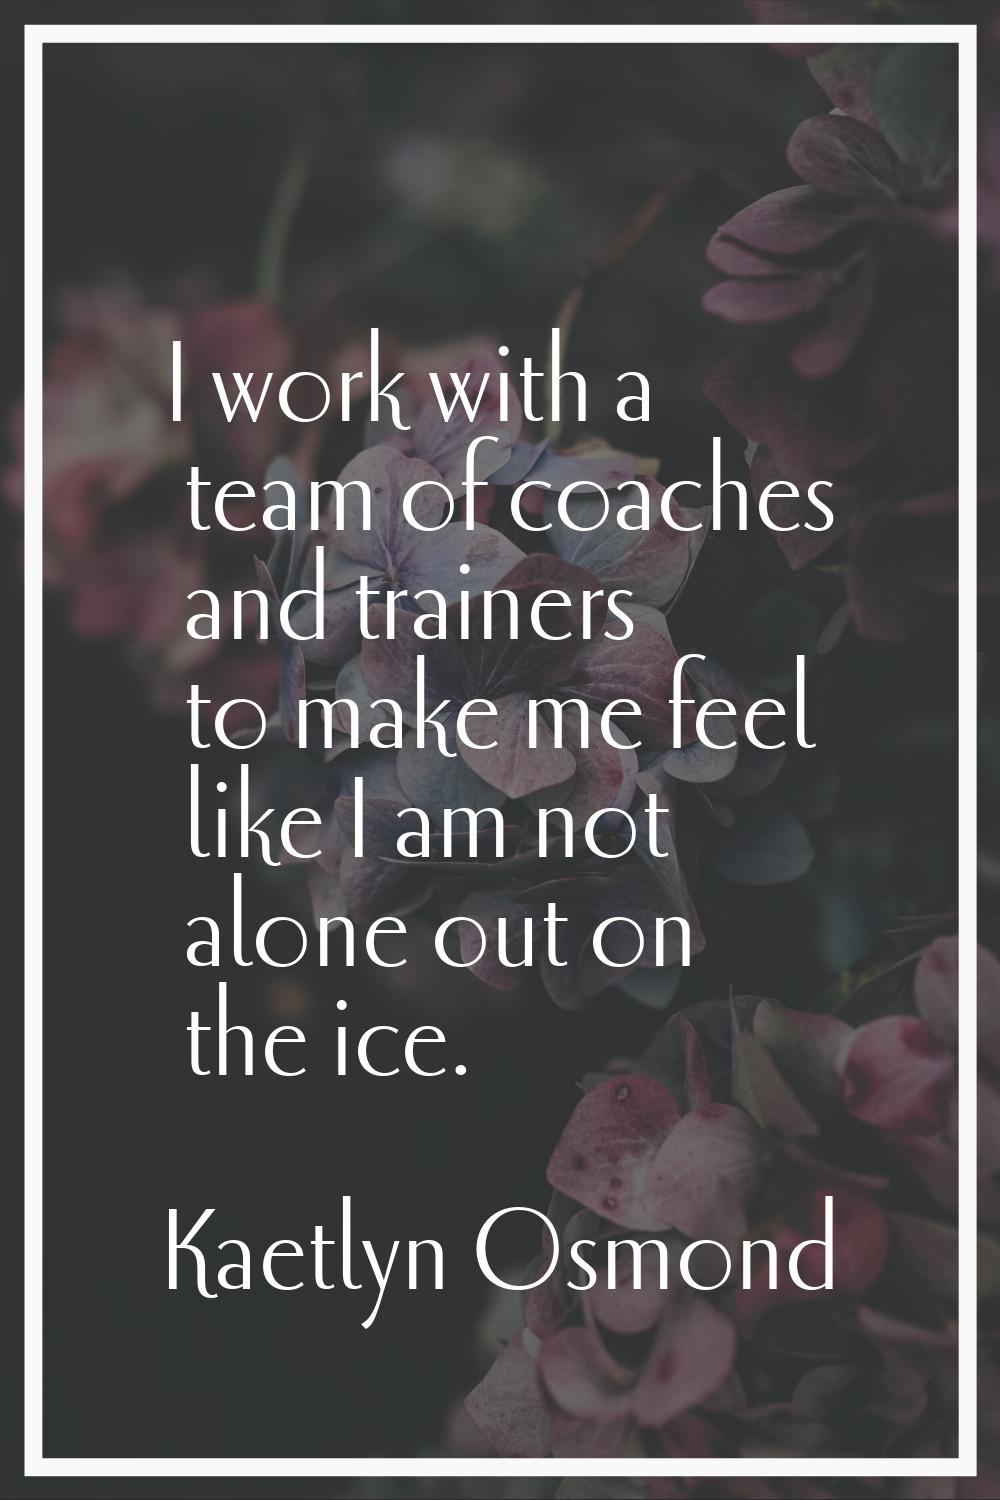 I work with a team of coaches and trainers to make me feel like I am not alone out on the ice.